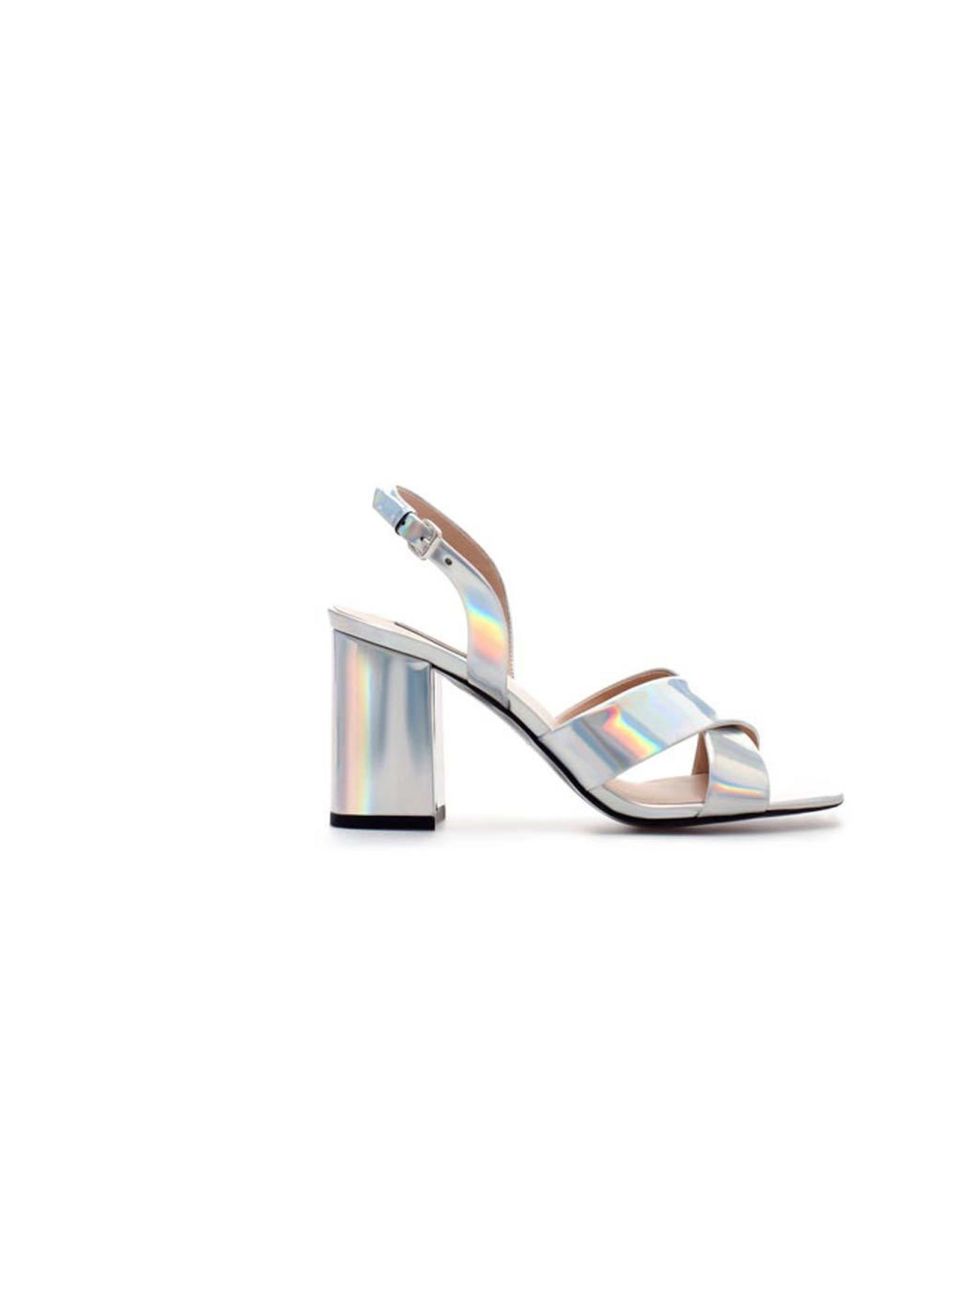 <p>We like these Zara sandals for  many reasons: the metallic colour, the chunky heel which makes them easy to wear and the price.</p><p>Buy them now! £59.99 at <a href="http://www.zara.com/webapp/wcs/stores/servlet/product/uk/en/zara-neu-S2013/358009/118